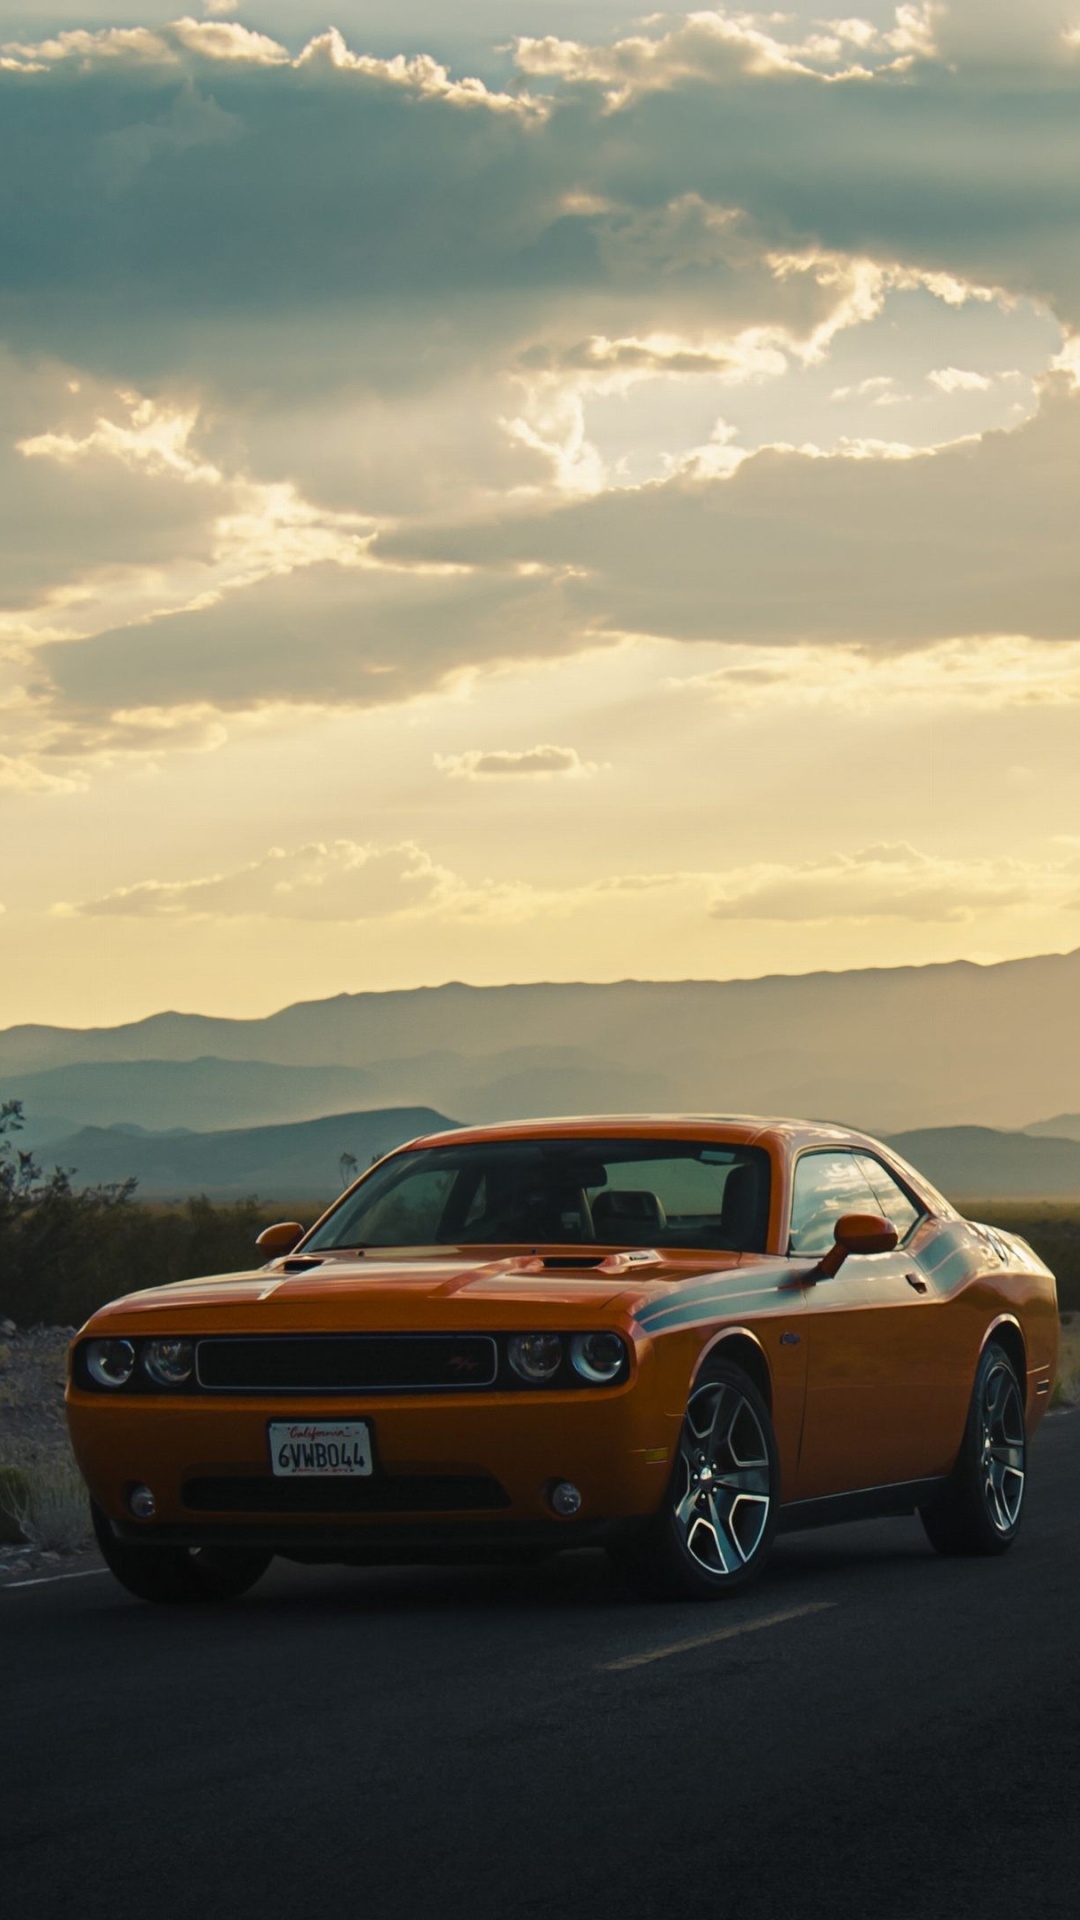 Dodge vehicles, Muscle car lineup, American power, Aggressive styling, 1080x1920 Full HD Phone